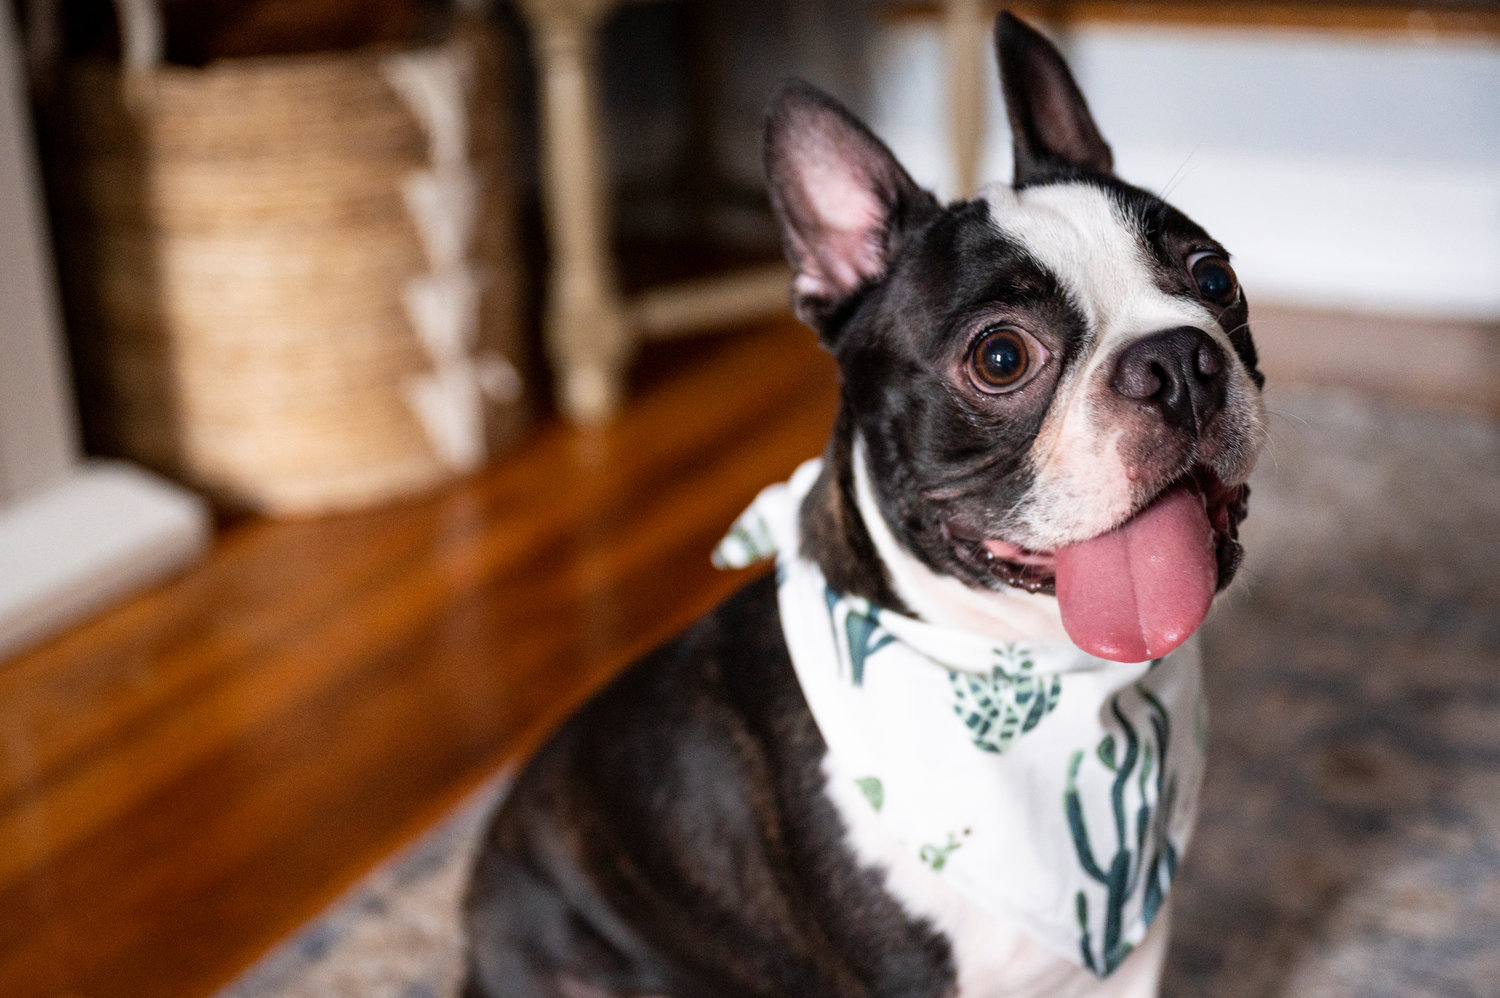 Leilani Roman-Diaz’s Boston terrier Mose wears one of her homemade bandanas, one of a number of accessories the Riverdale resident sells through her business, The Plaid Pet Co.